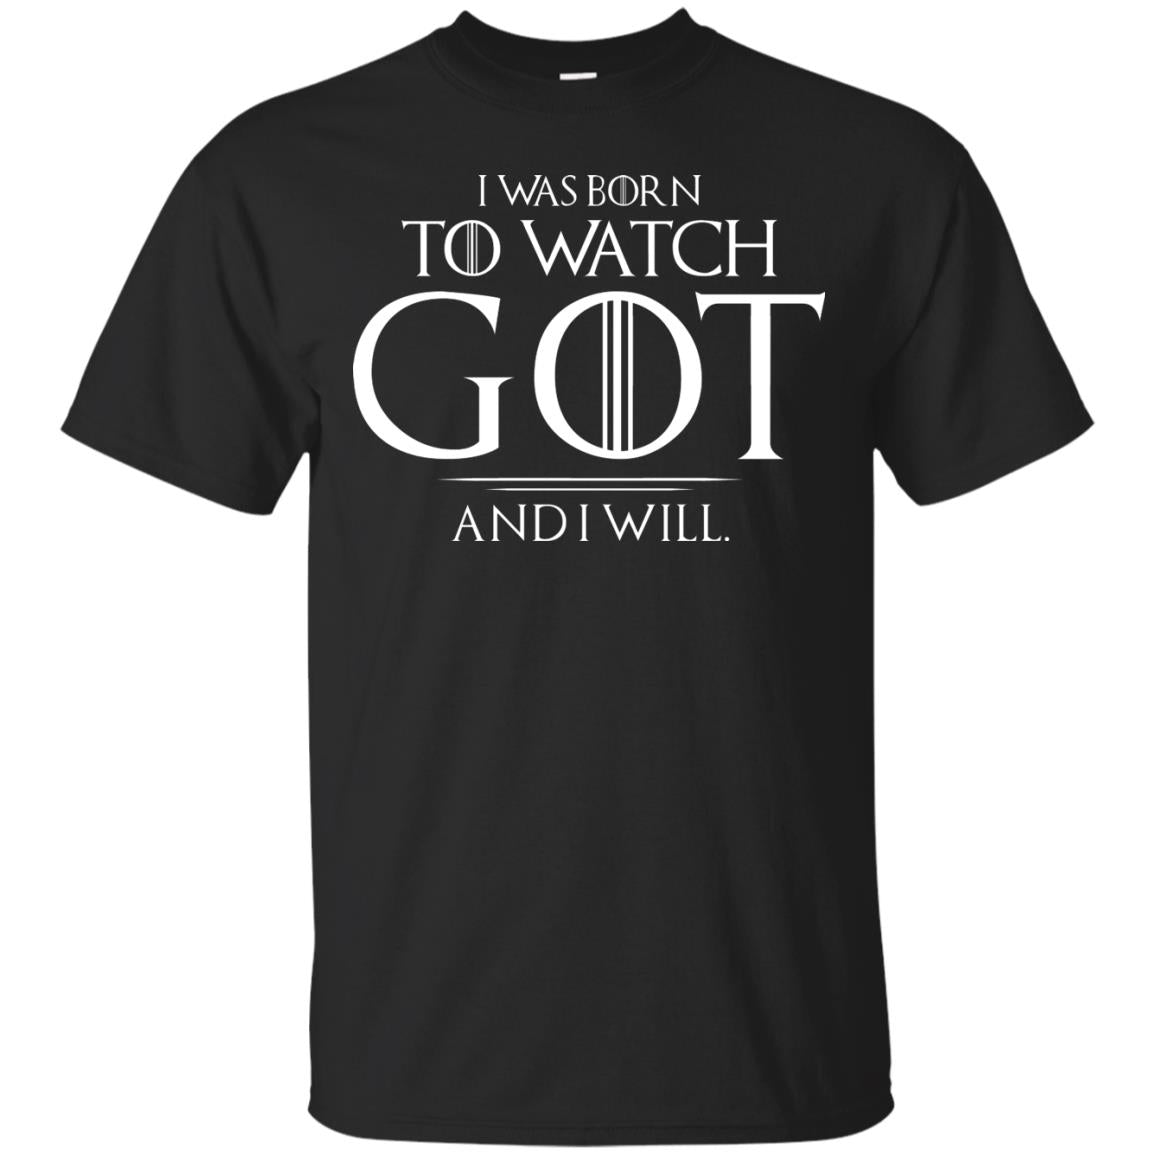 I Was Born To Watch Got And I Will Game Of Thrones Fan T-shirtG200 Gildan Ultra Cotton T-Shirt